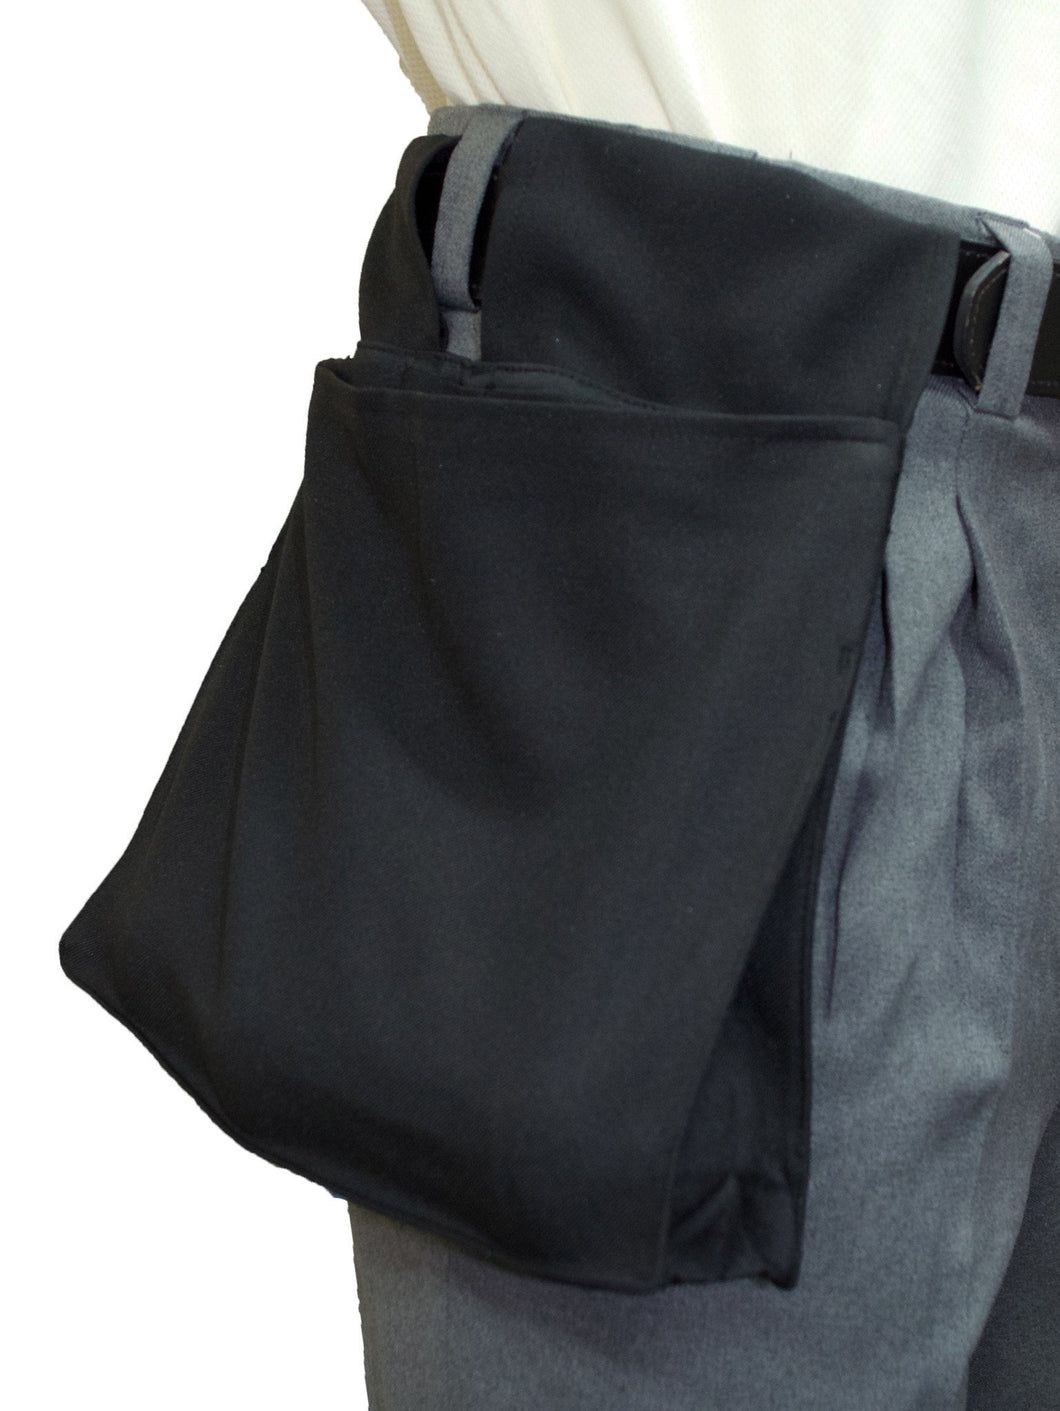 BBS383-Smitty Deluxe Ball Bag w/ Expandable Insert - Available in 4 colors - Black, Navy, Charcoal & Heather Grey